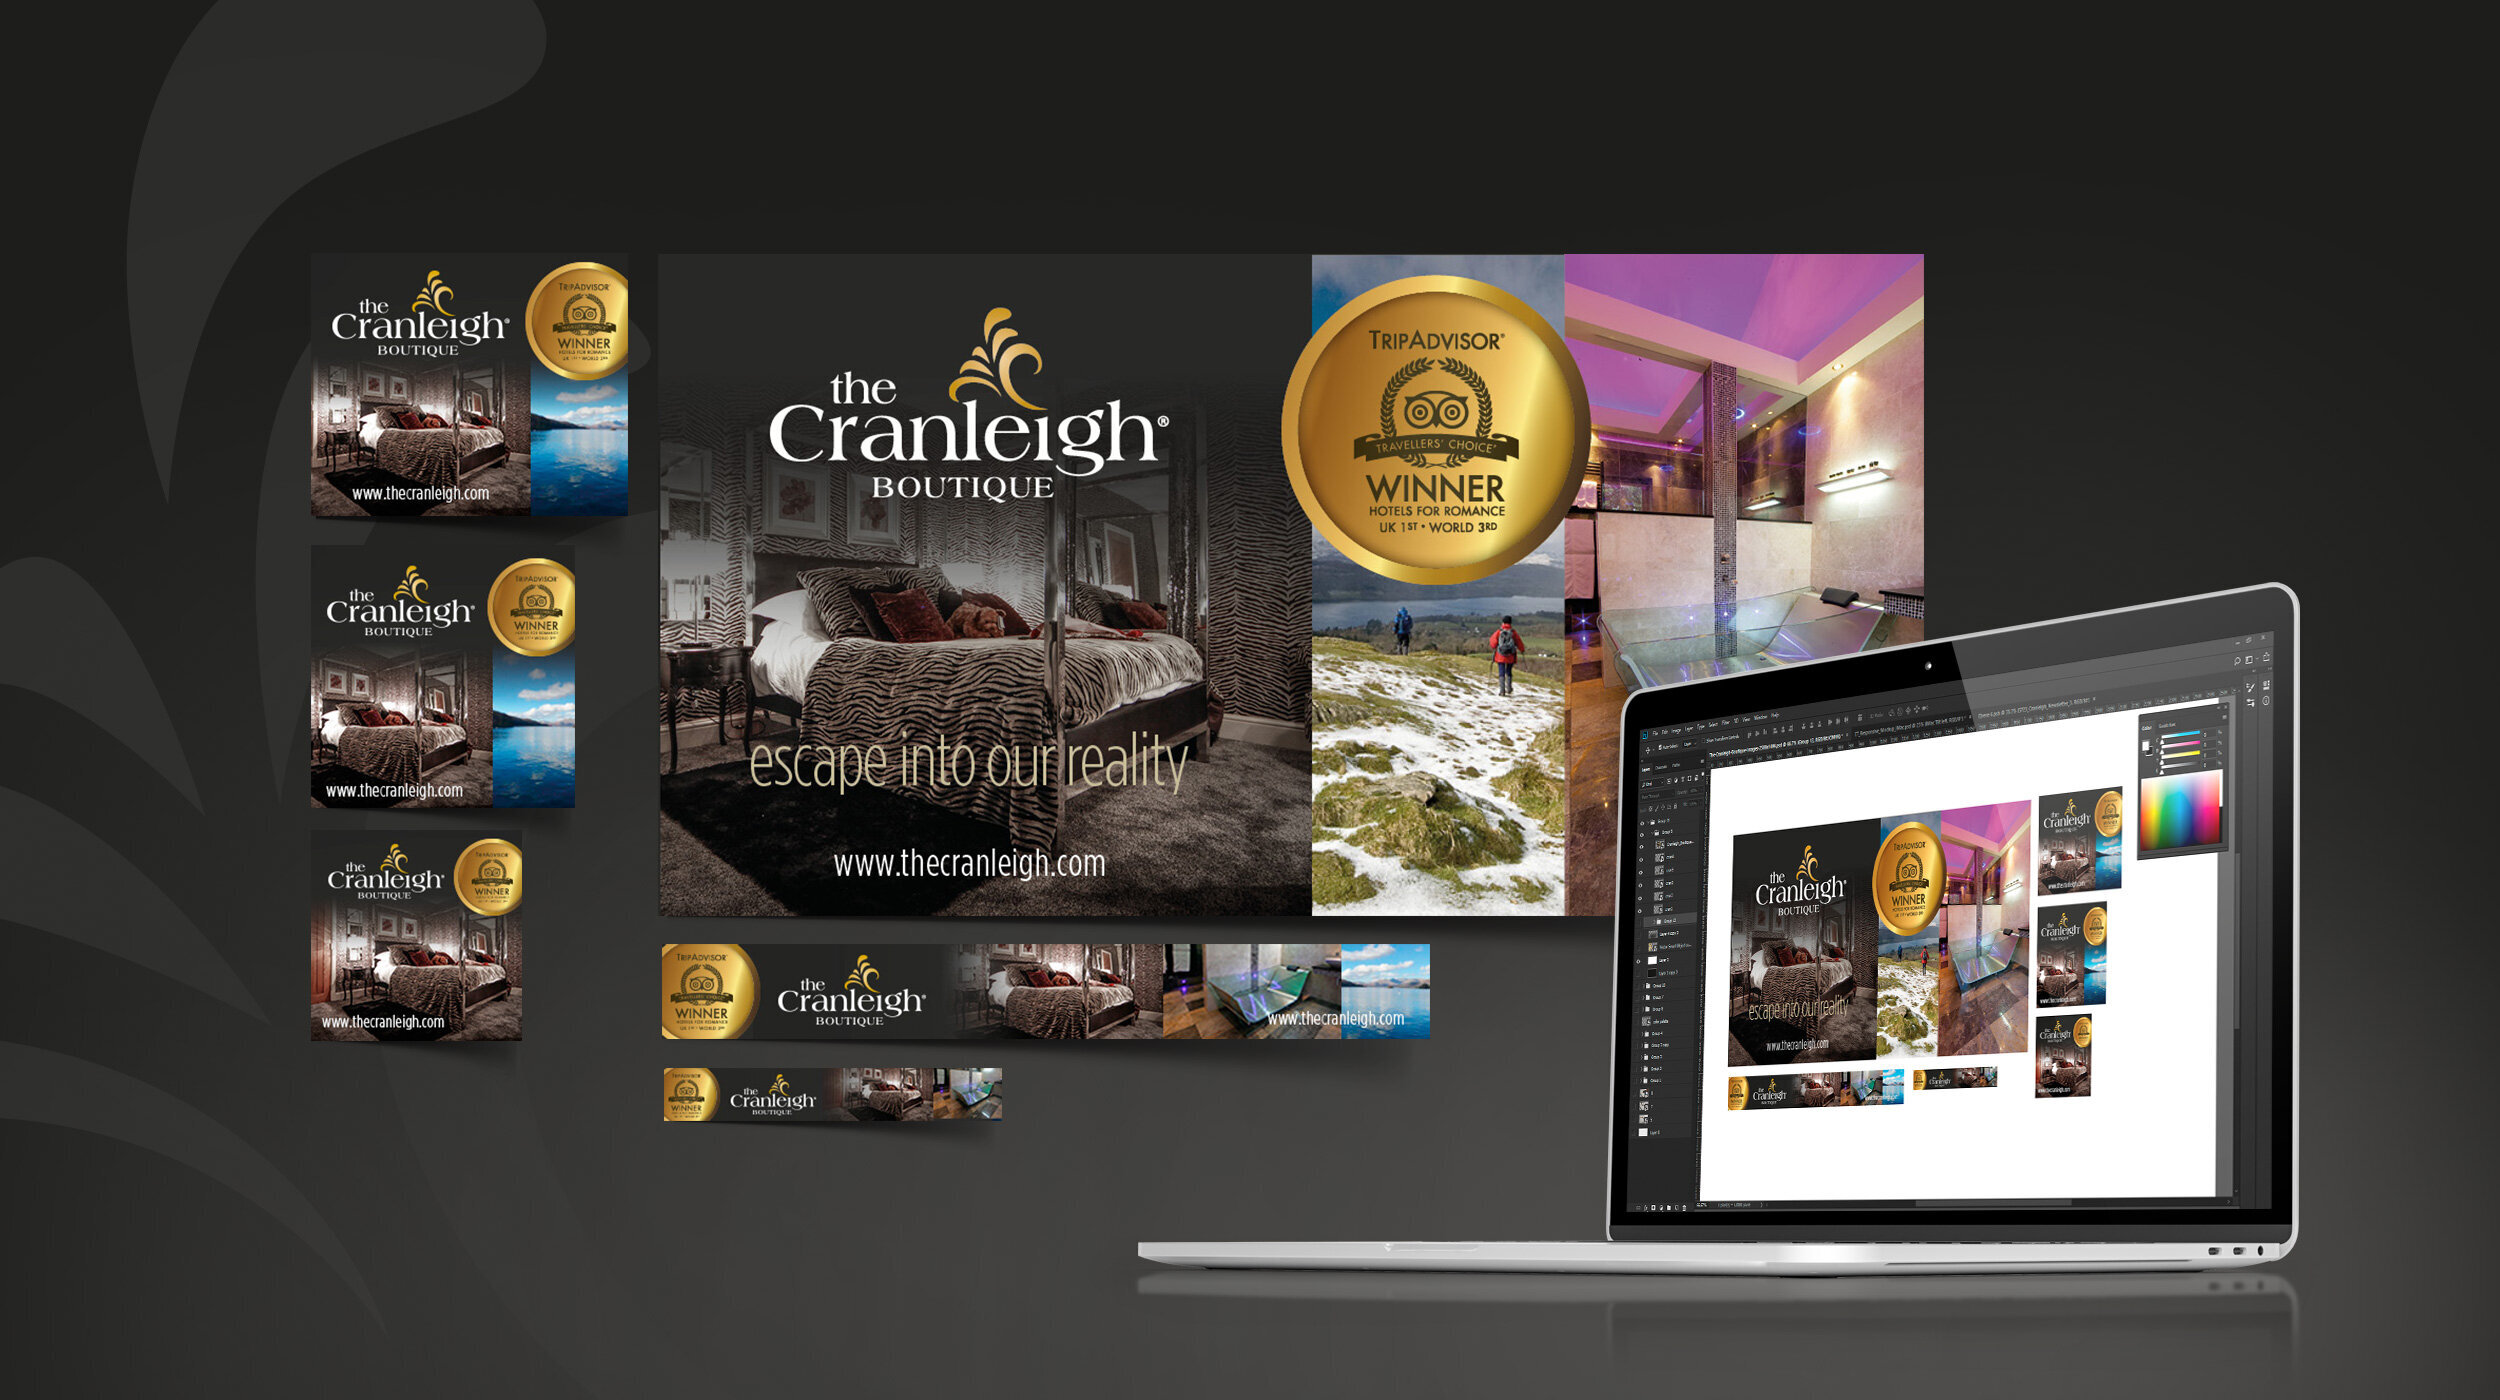 brand-strategy-design-the-cranleigh-boutique-the-brand-chap-27.jpeg